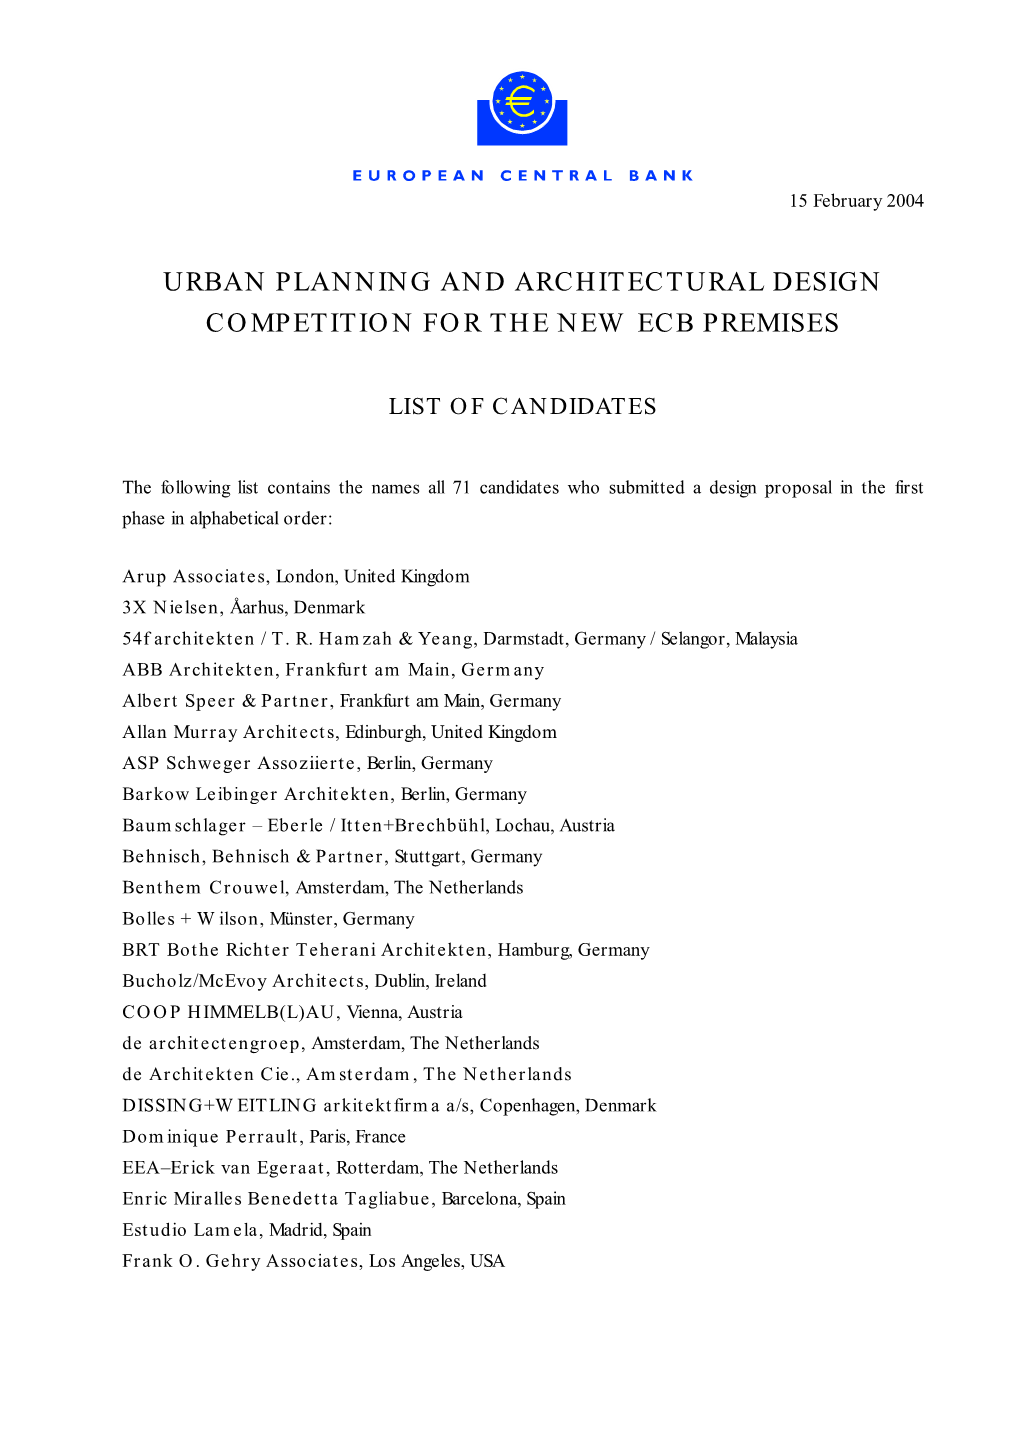 List of Candidates, Urban Planning and Architectural Design